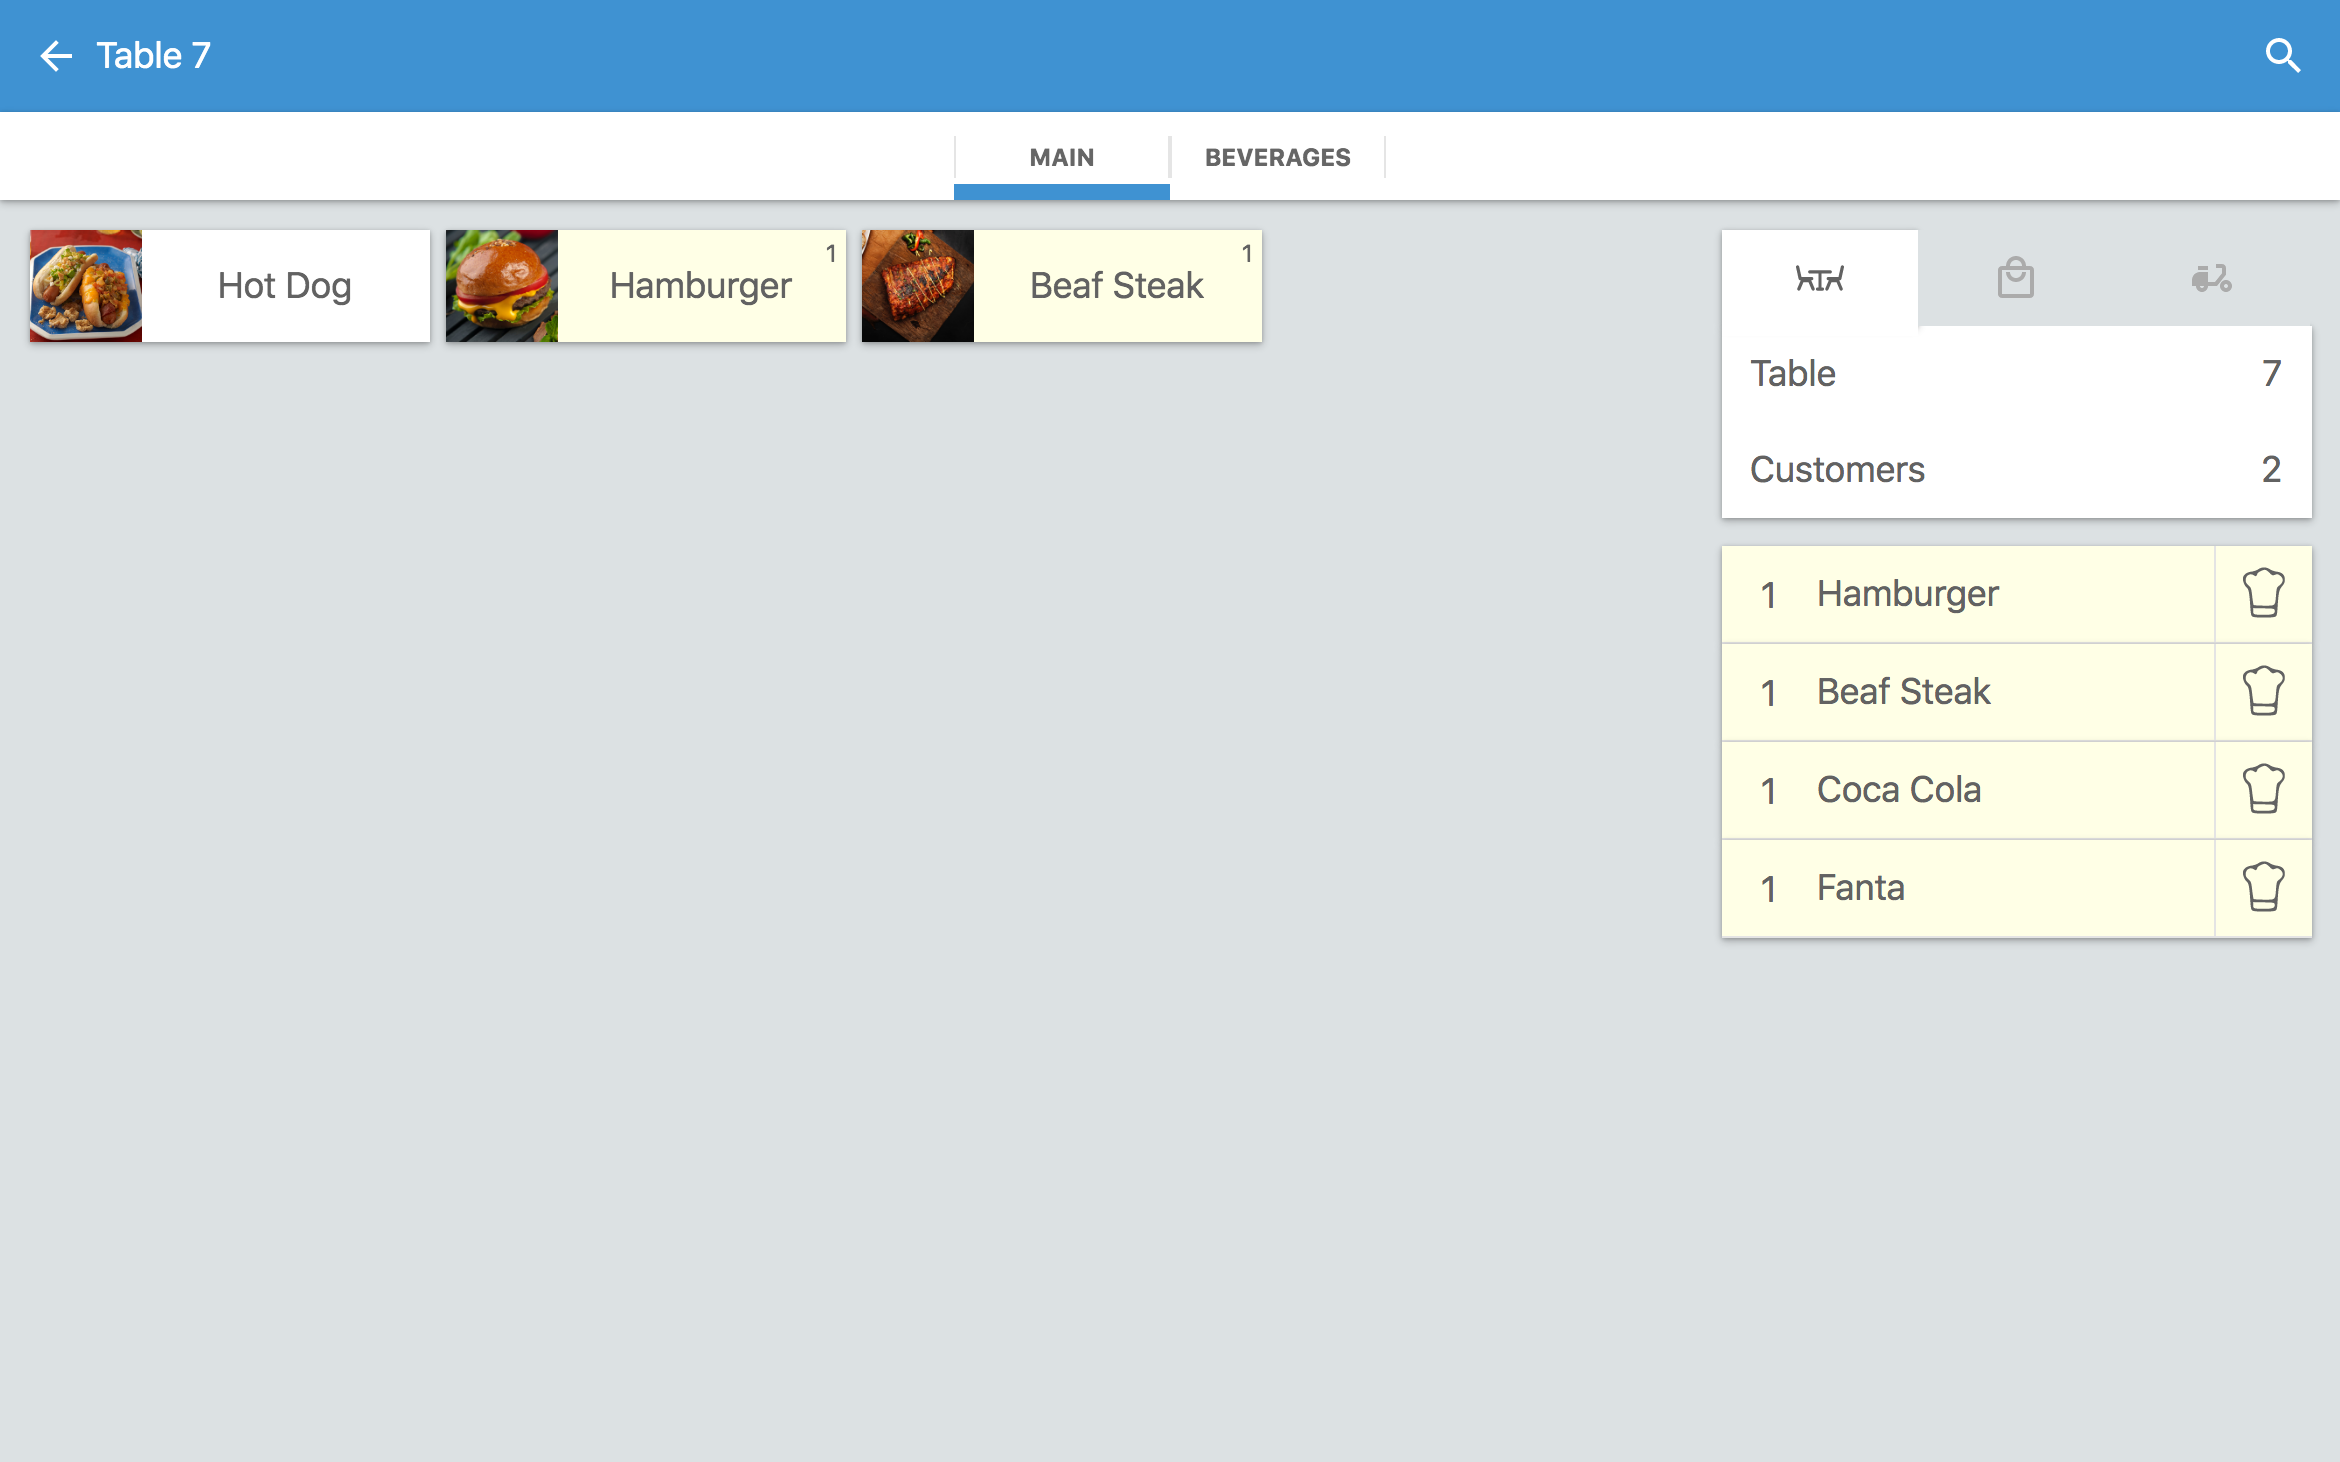 The interface of the restaurant management software